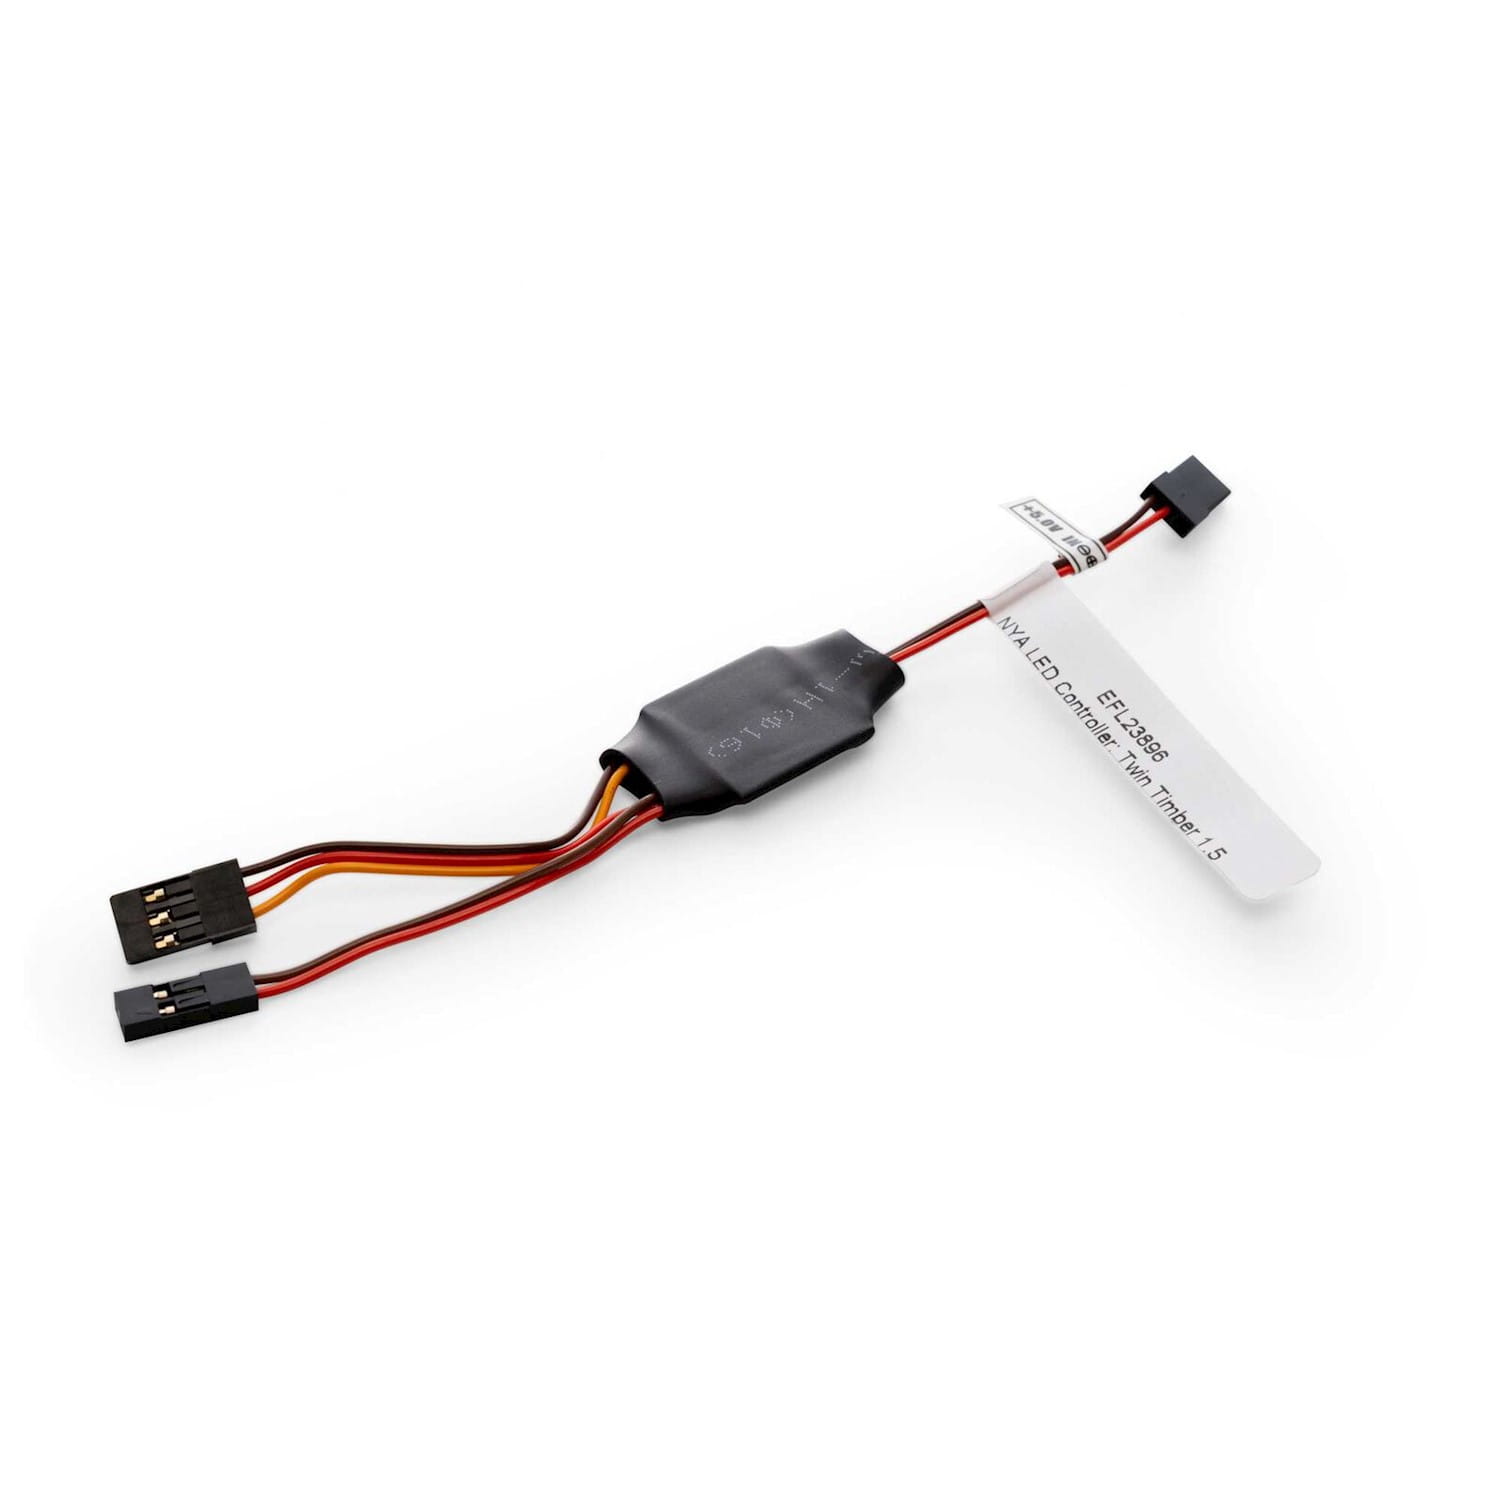 E-flite LED Controller: Twin Timber 1.6m